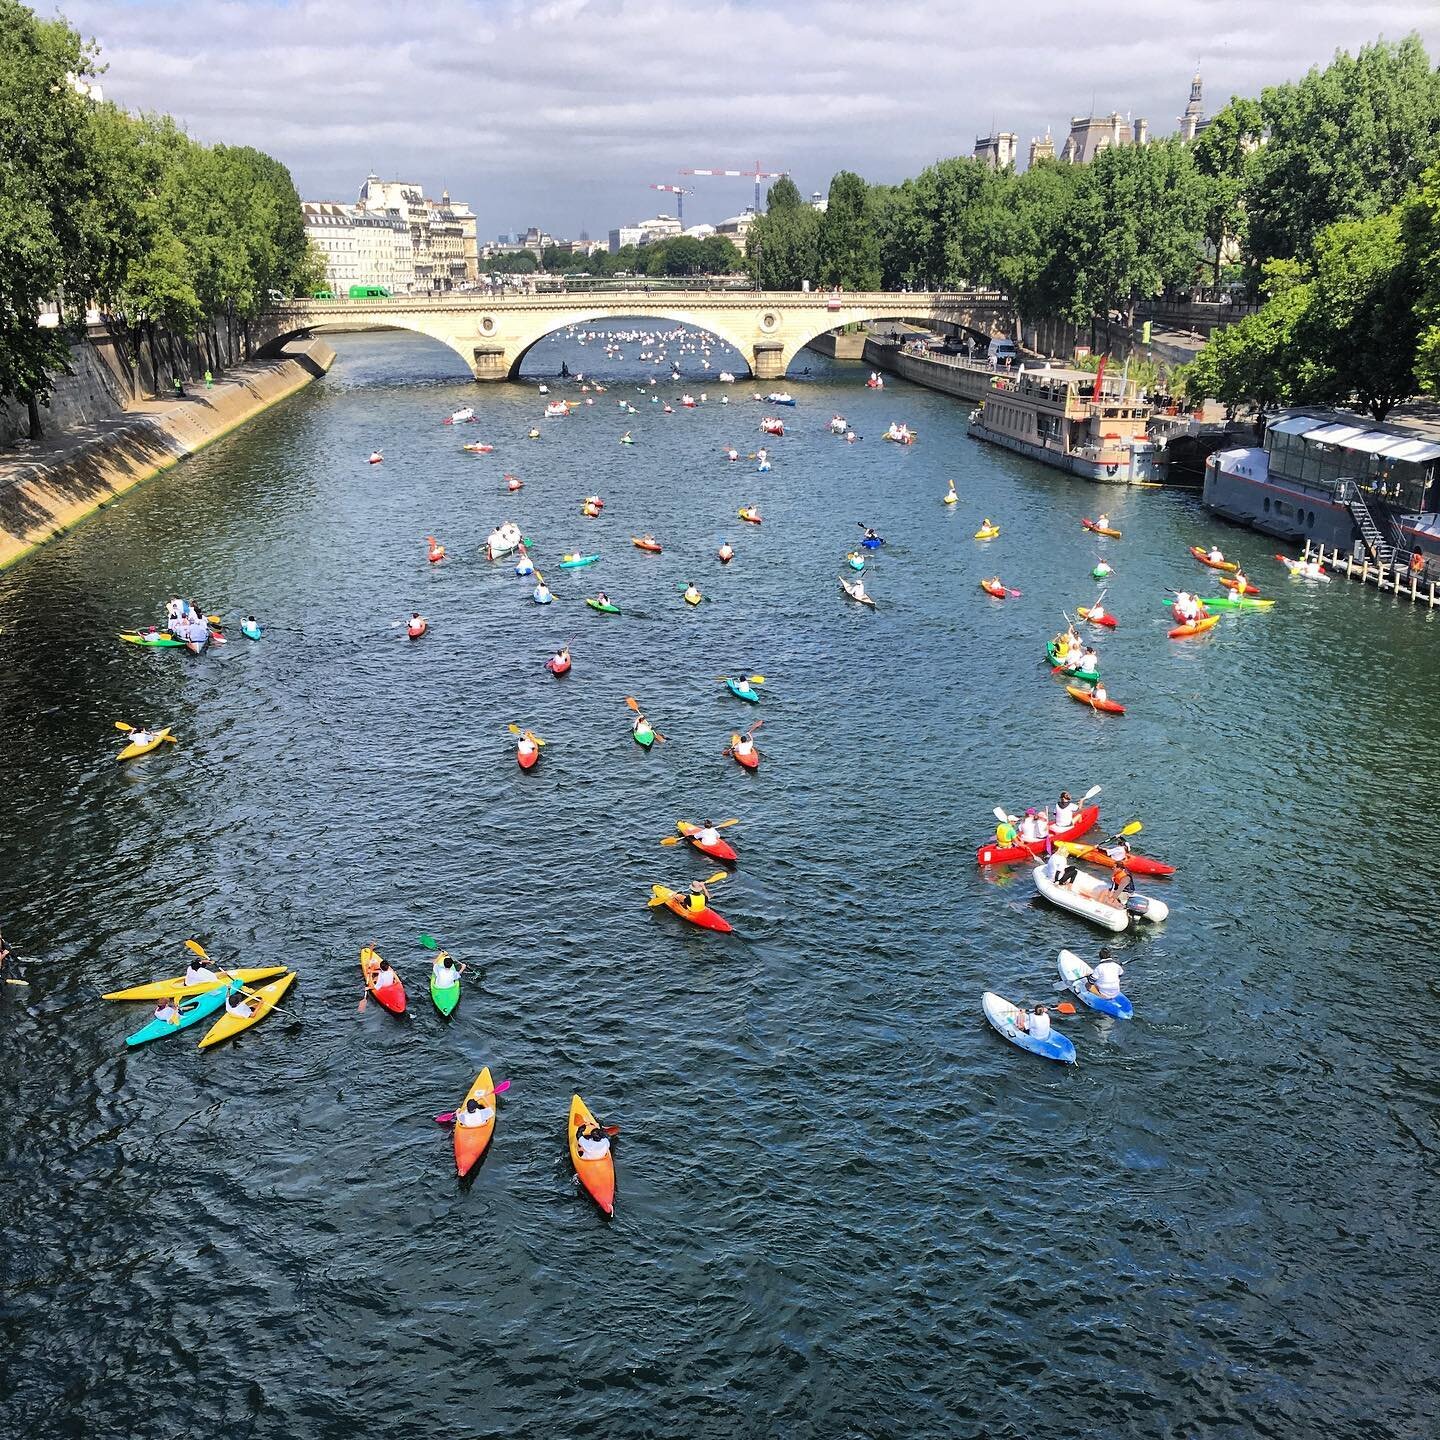 Over two days in June 2017, Paris City Hall put on a show of thirty- three Olympic sports. Command central was the Pont Alexandre III, in the heart of touristic Paris. The most colorful event was a flotilla of hundreds of kayaks and canoes paddling f